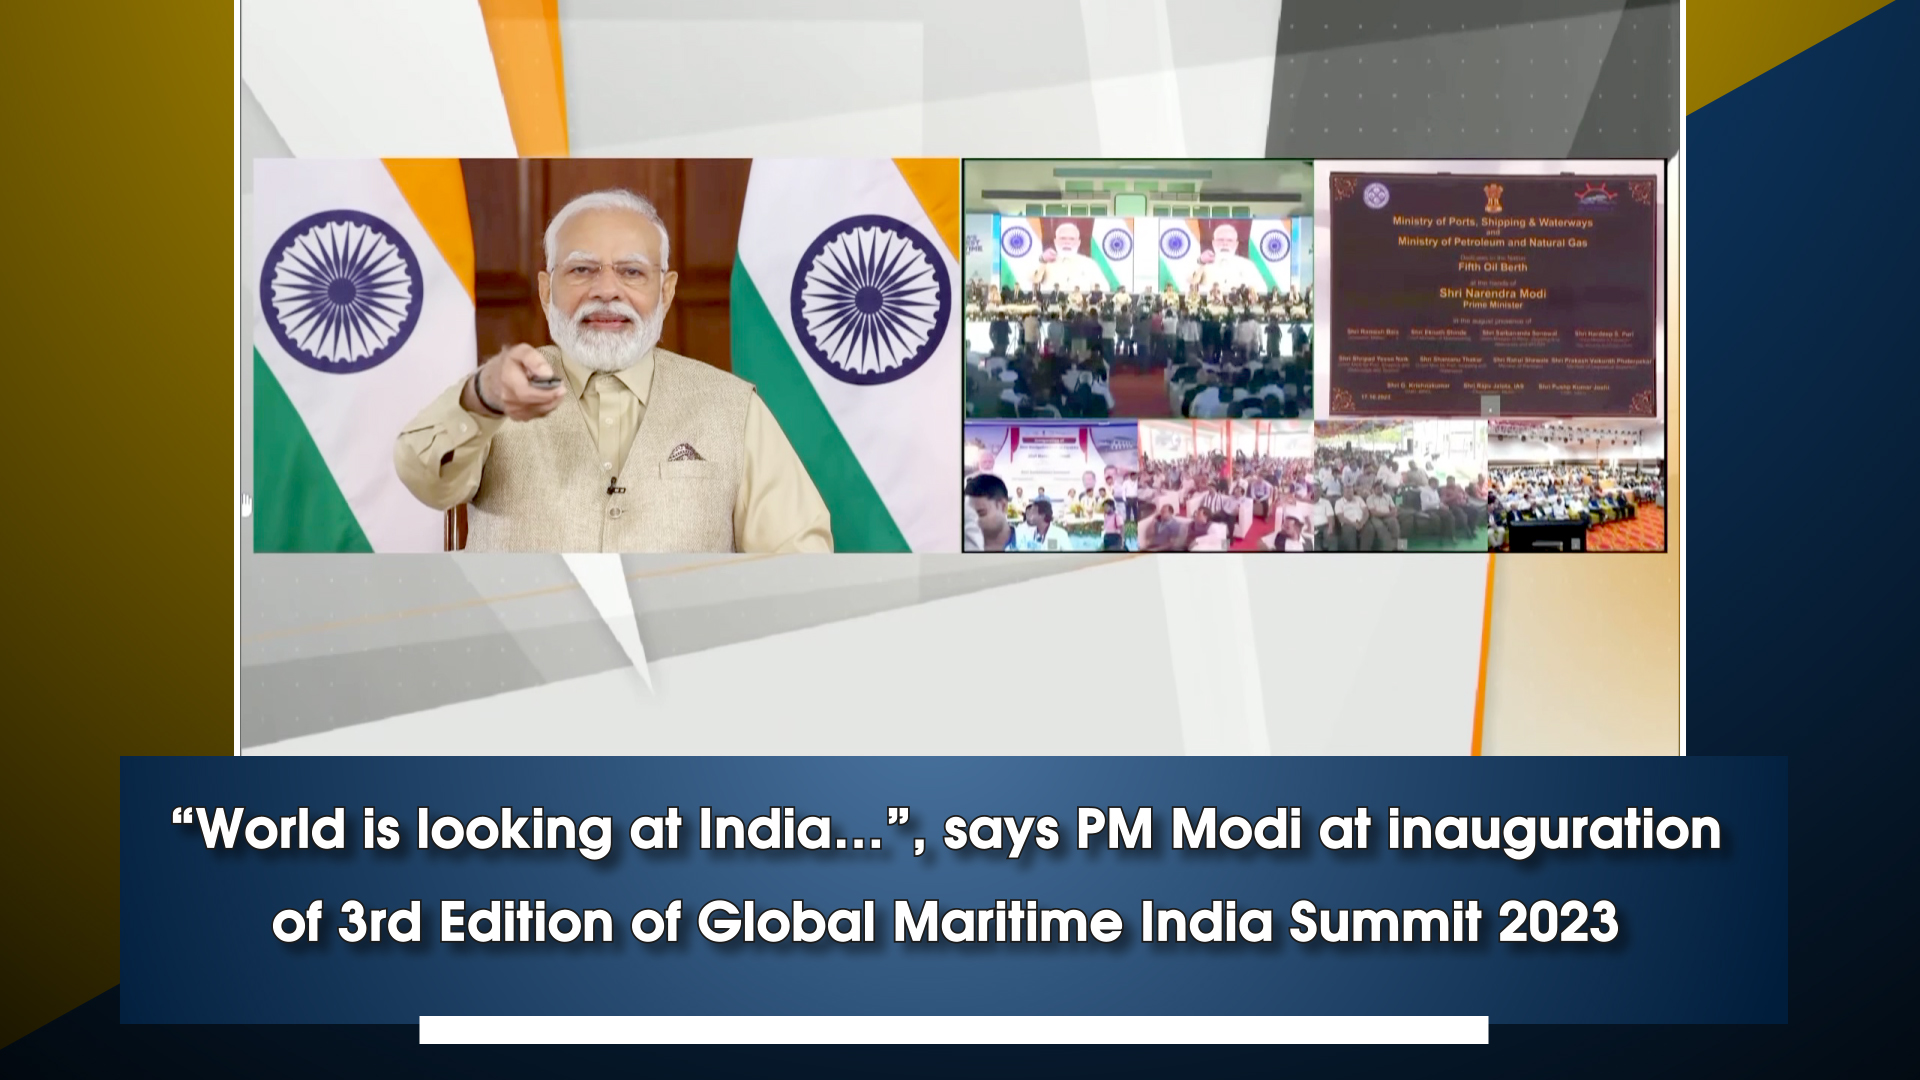 ``World is looking at India` says PM Narendra Modi at inauguration of 3rd Edition of Global Maritime India Summit 2023